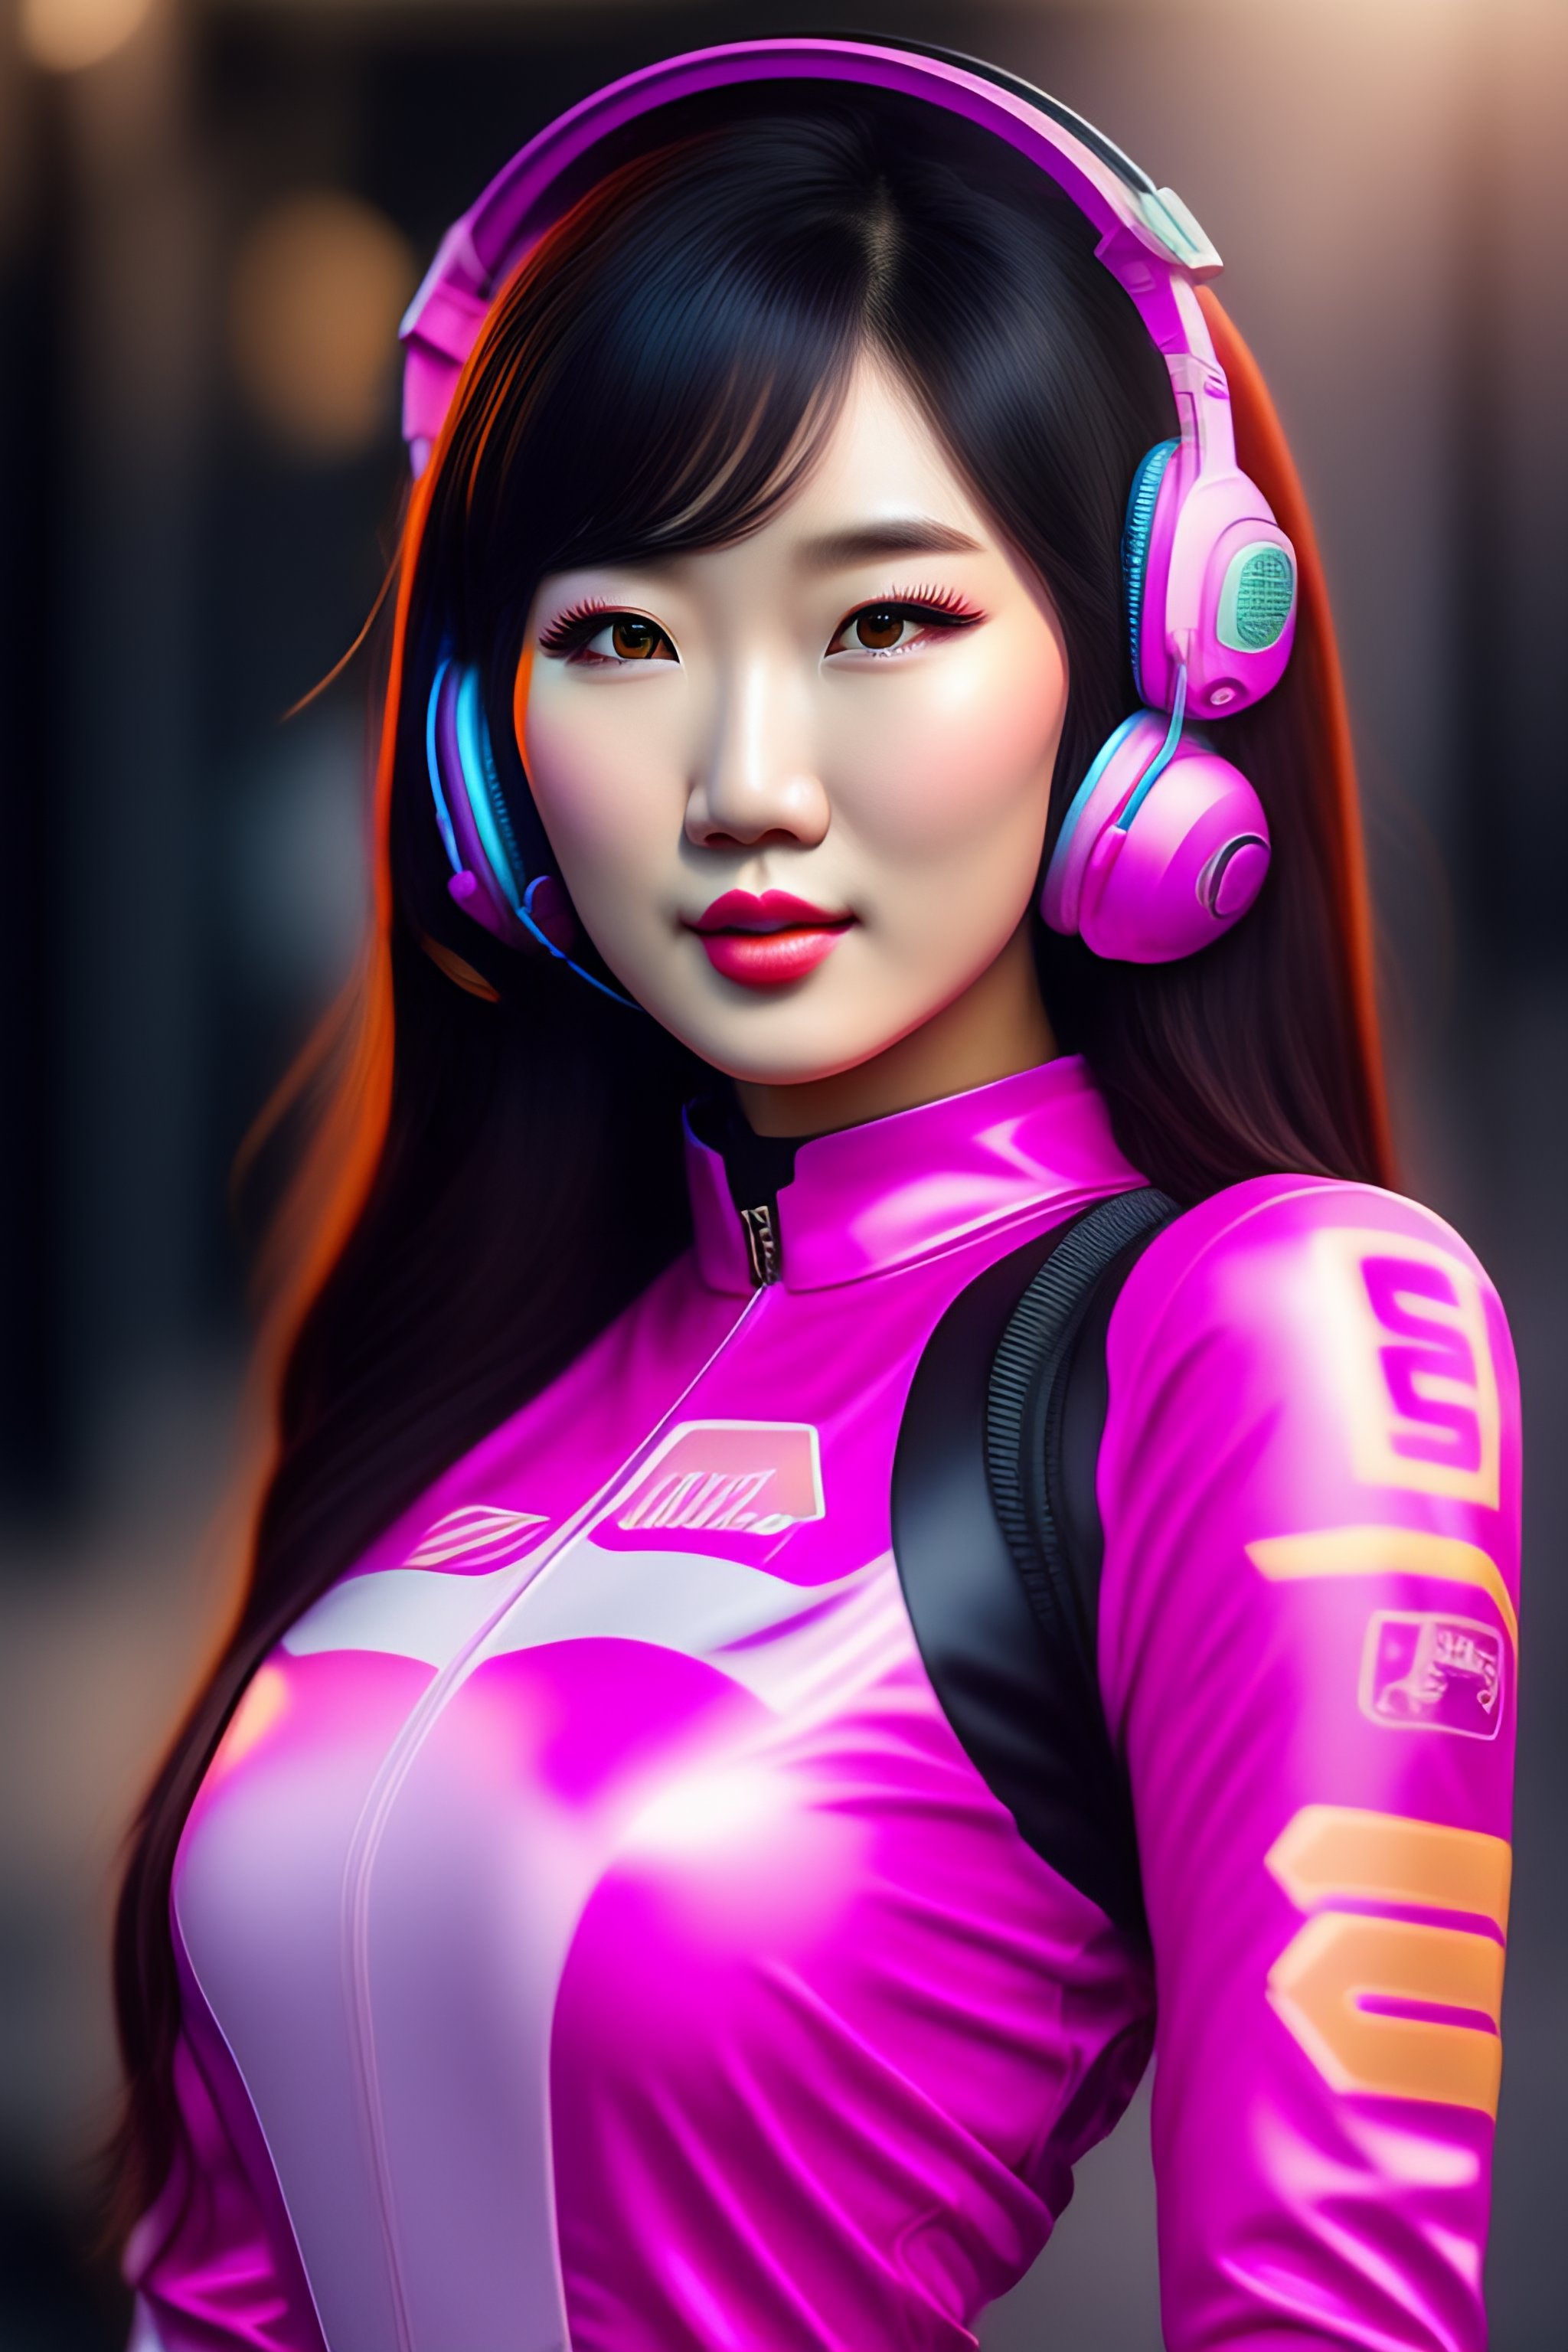 Lexica Portrait Of D Va From Overwatch 18 Year Old Korean Girl Headset And Pink Bodysuit